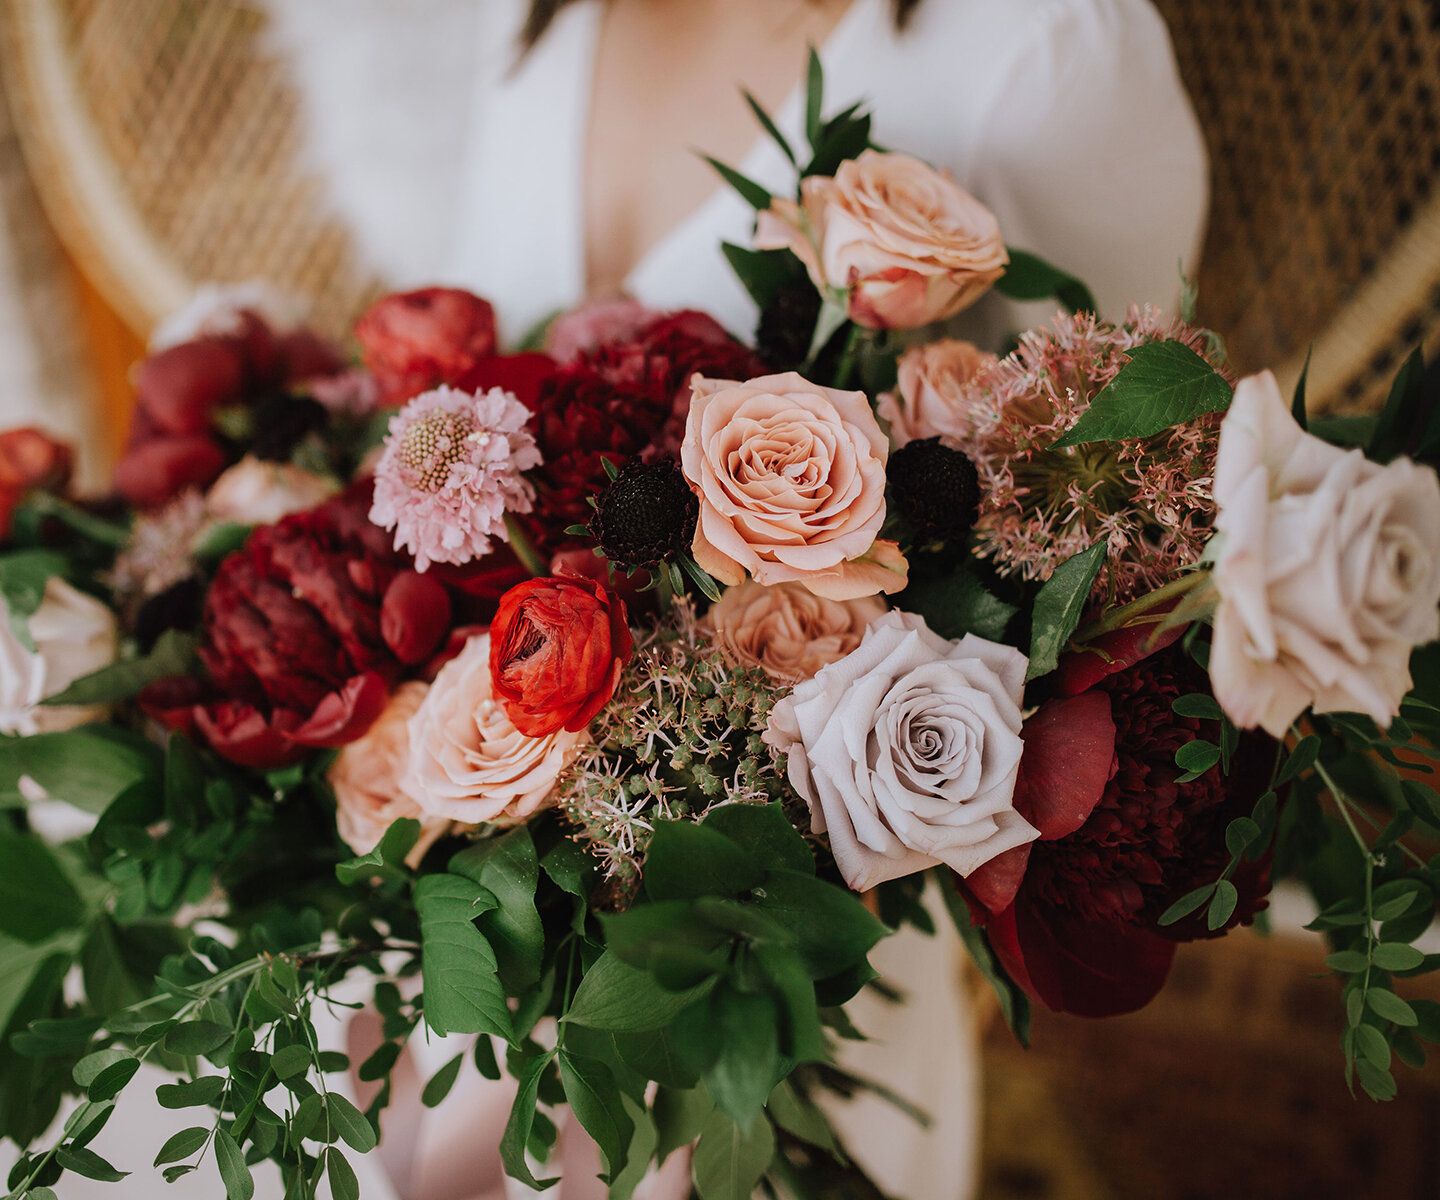 Bridal Bouquet Inspiration for Fall: 15 of the Prettiest Bouquets We've Seen This Autumn in Alberta and the Rockies